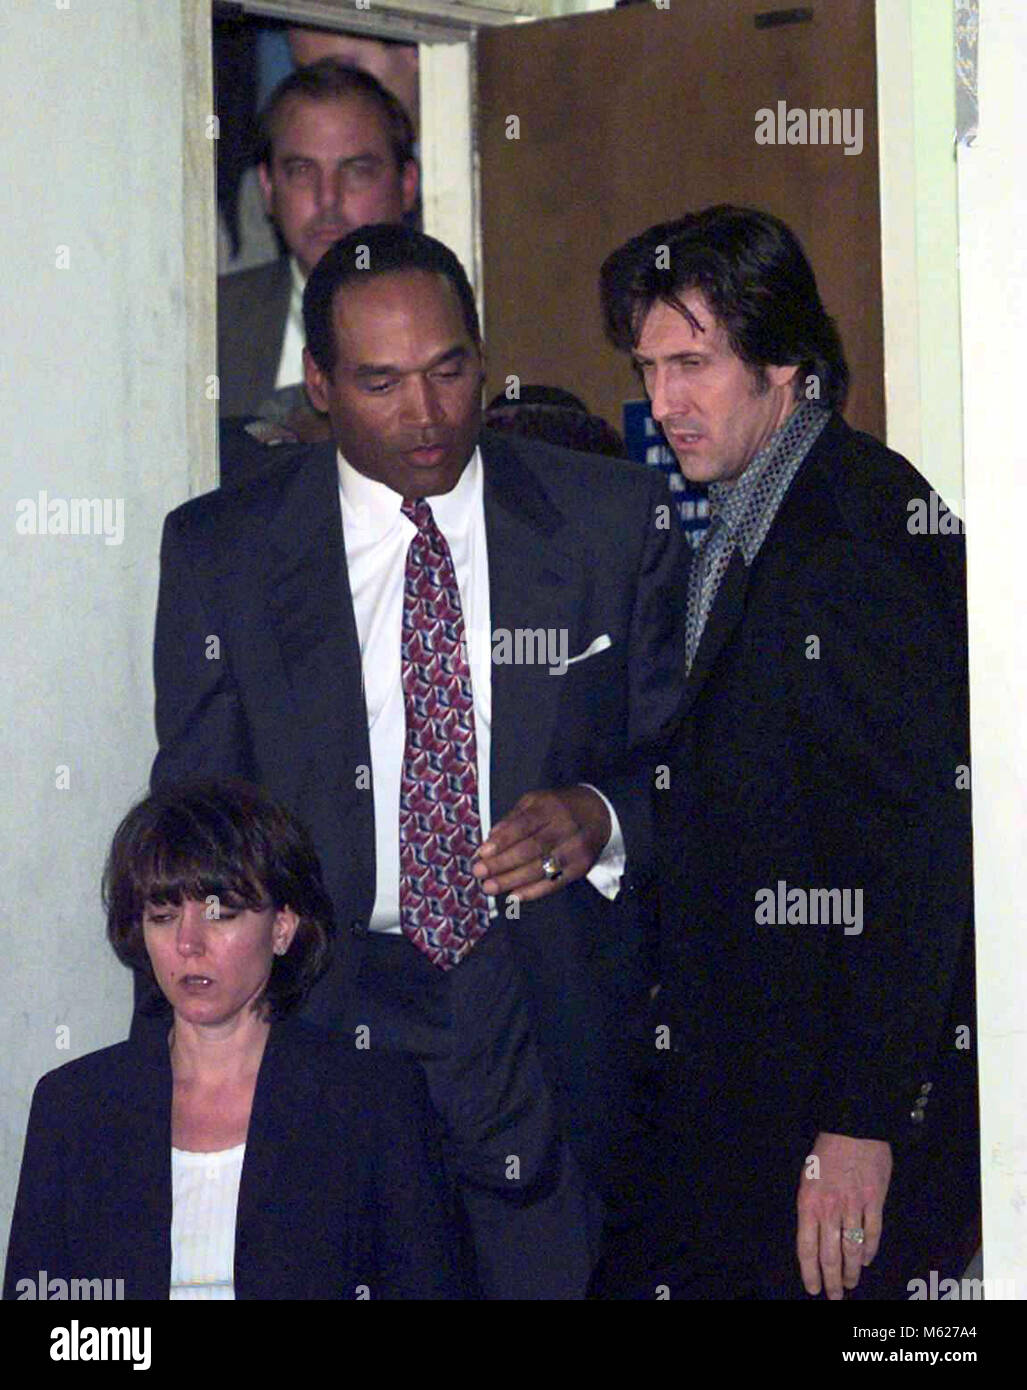 O.J. Simpson leaves the Santa Monica County Courthouse after the verdict for the civil trial for the death of Ron Goldman and Nicole Brown Simpson on February 4, 1997. Photo by Francis Specker Stock Photo